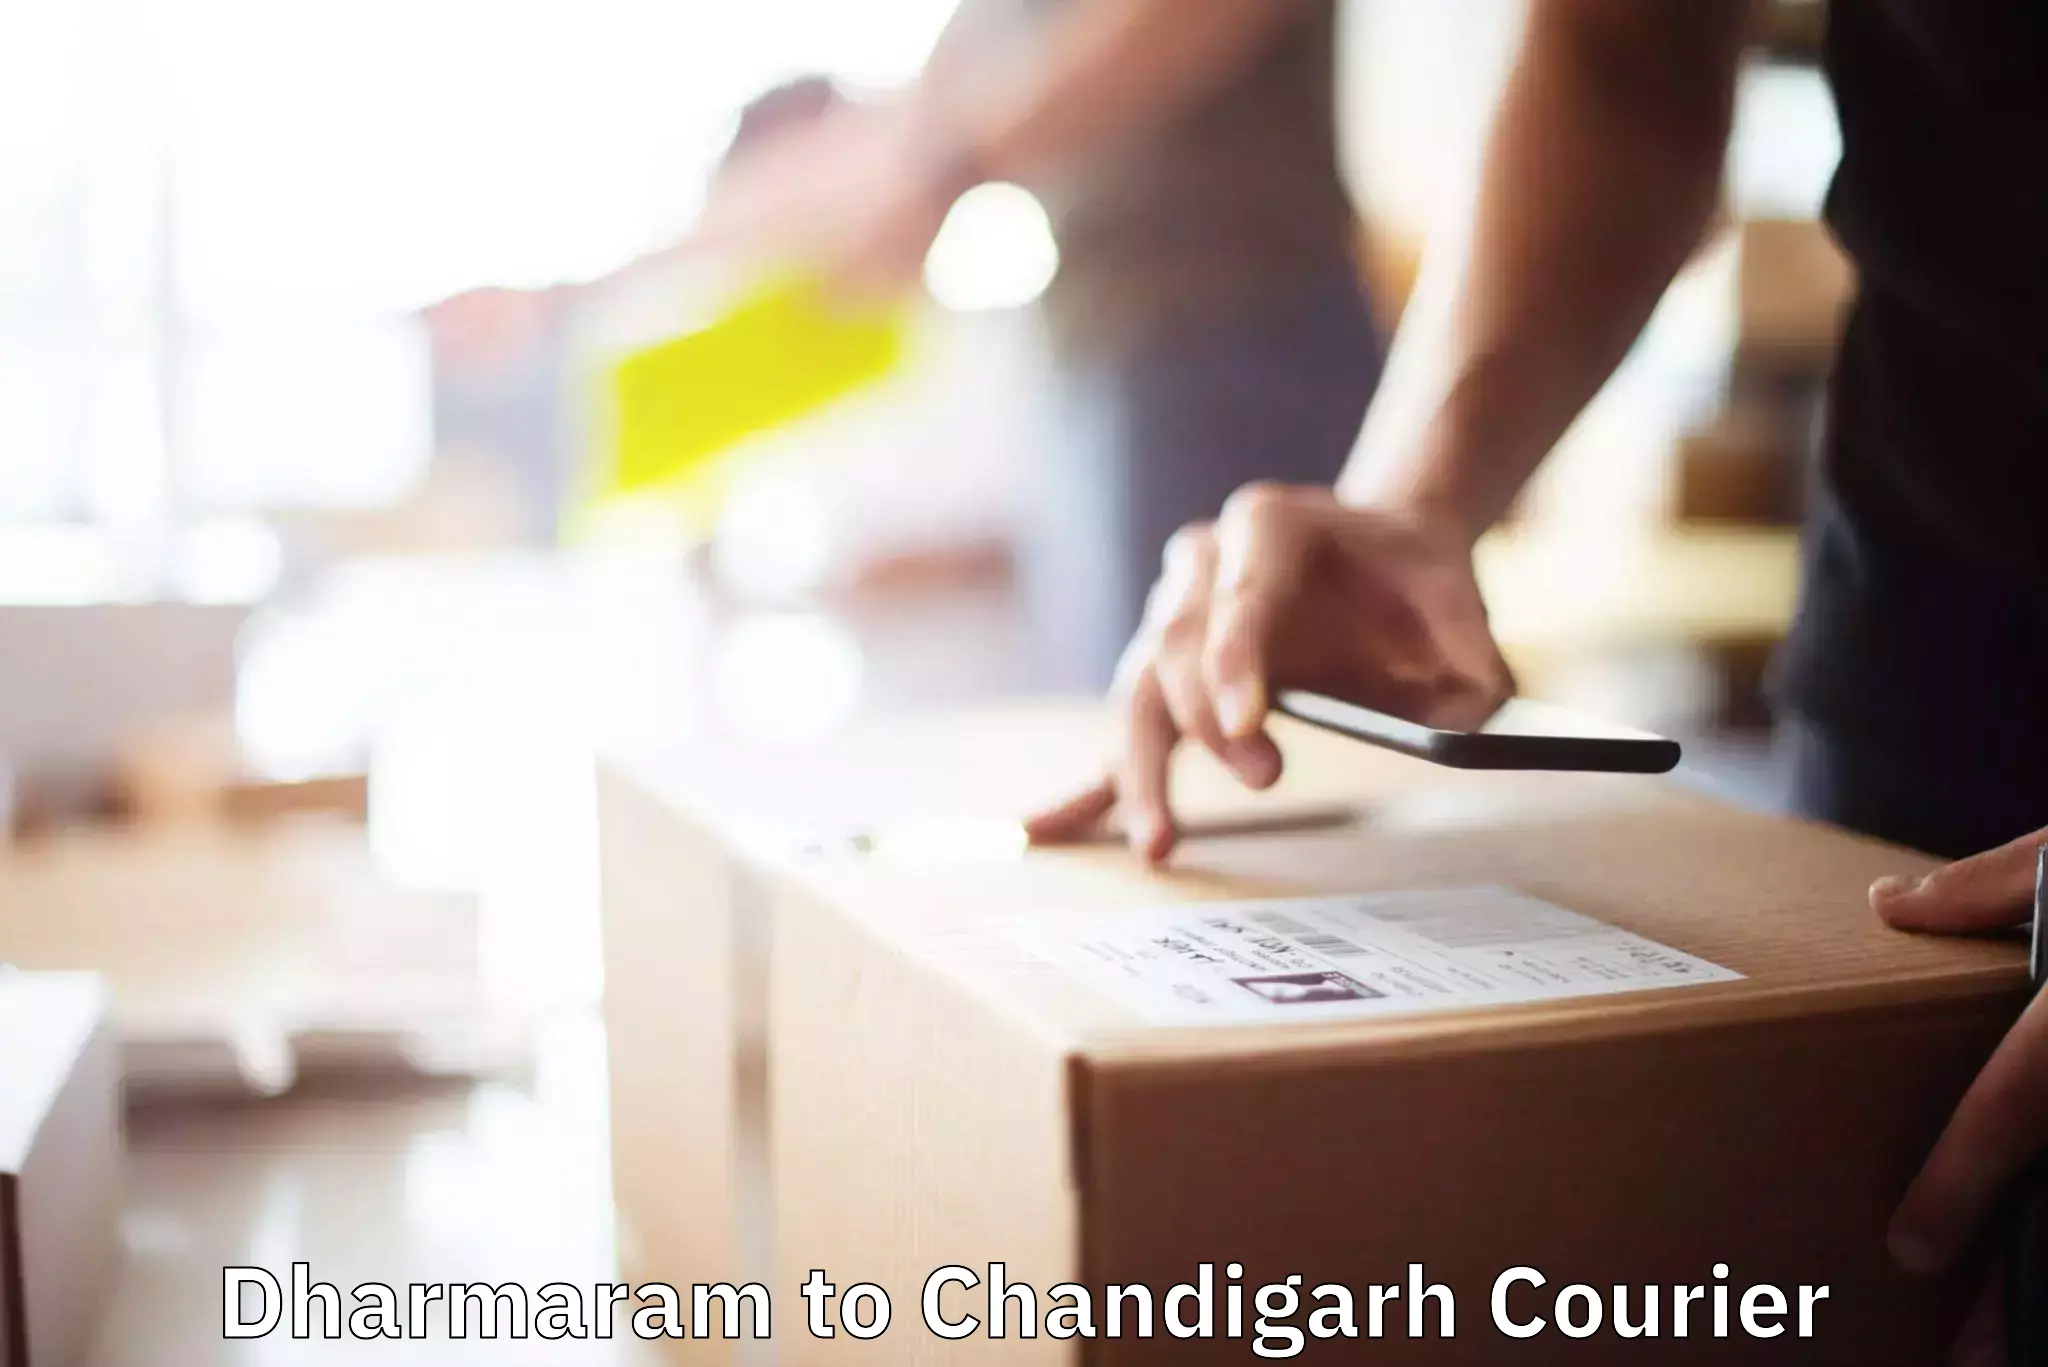 Furniture moving assistance Dharmaram to Chandigarh